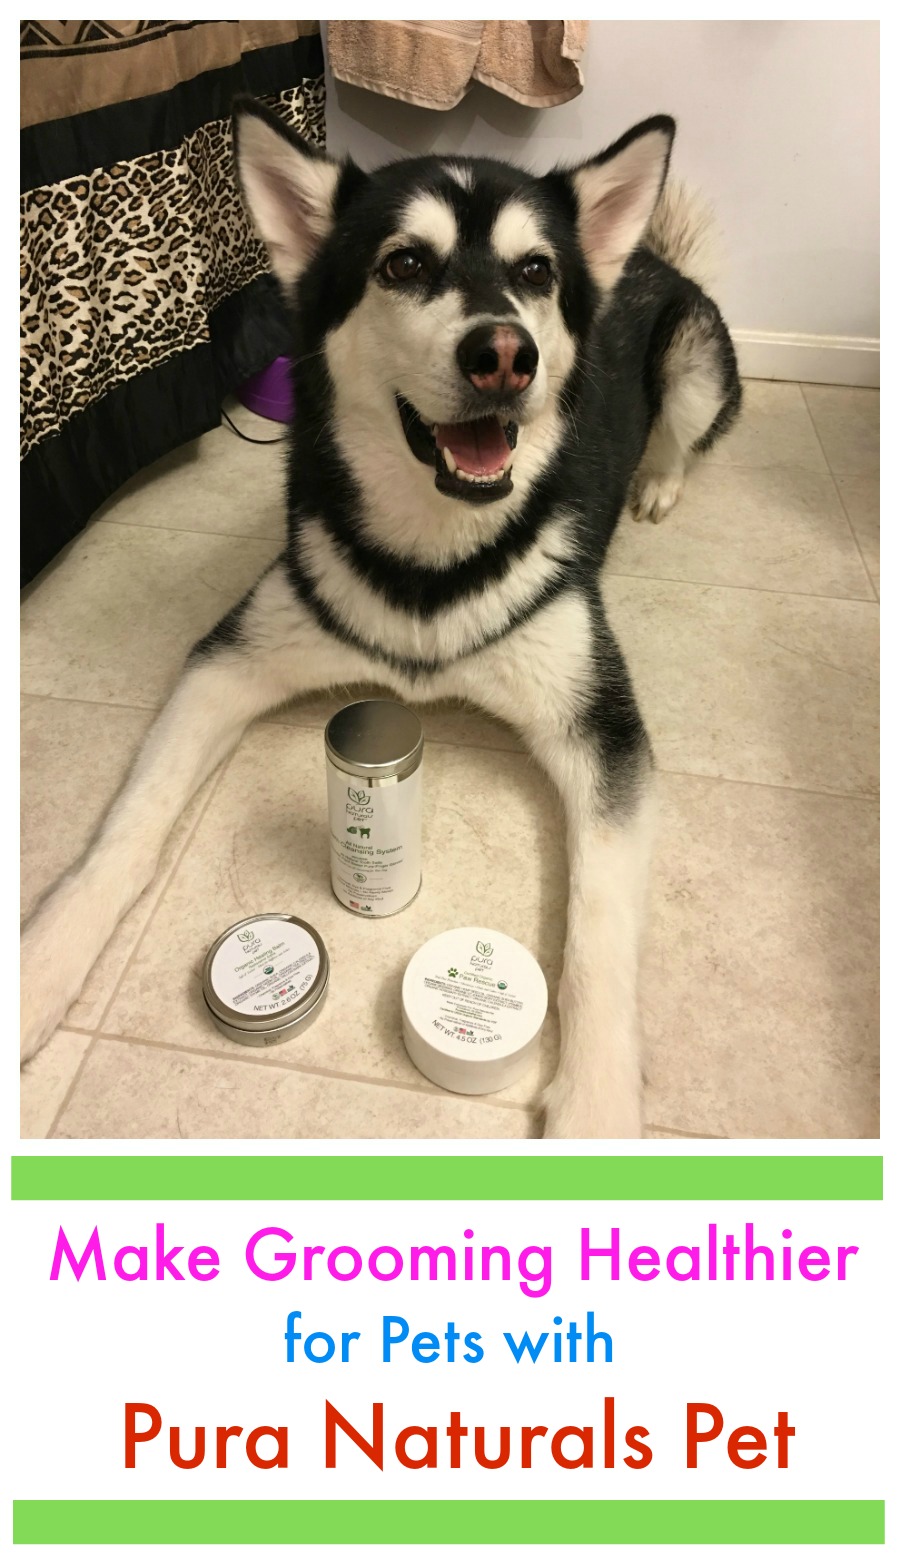 Looking for high quality, organic grooming products for your pets made from all natural ingredients? See what we think of Pure Naturals Pet products here!